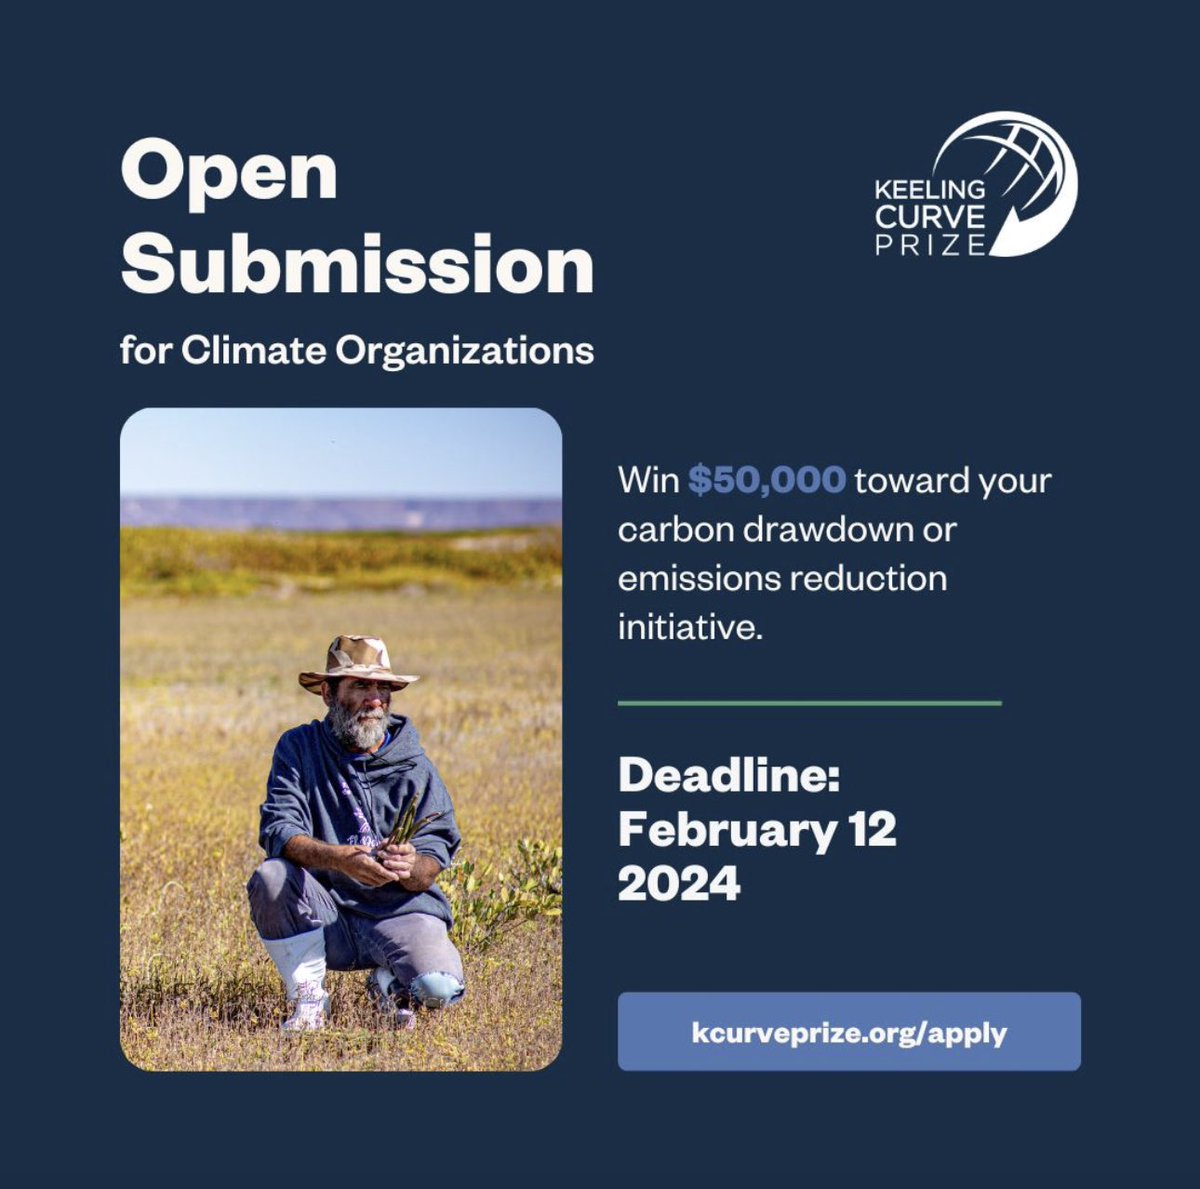 startups 📣 🌍

The #2024KeelingCurvePrize application is now open.The Keeling Curve Prize awards $50K each to 10 of the world’s best climate innovations across 5 categories:energy,finance, carbon sinks,social & cultural pathways,etc 

Apply: kcurveprize.org/apply